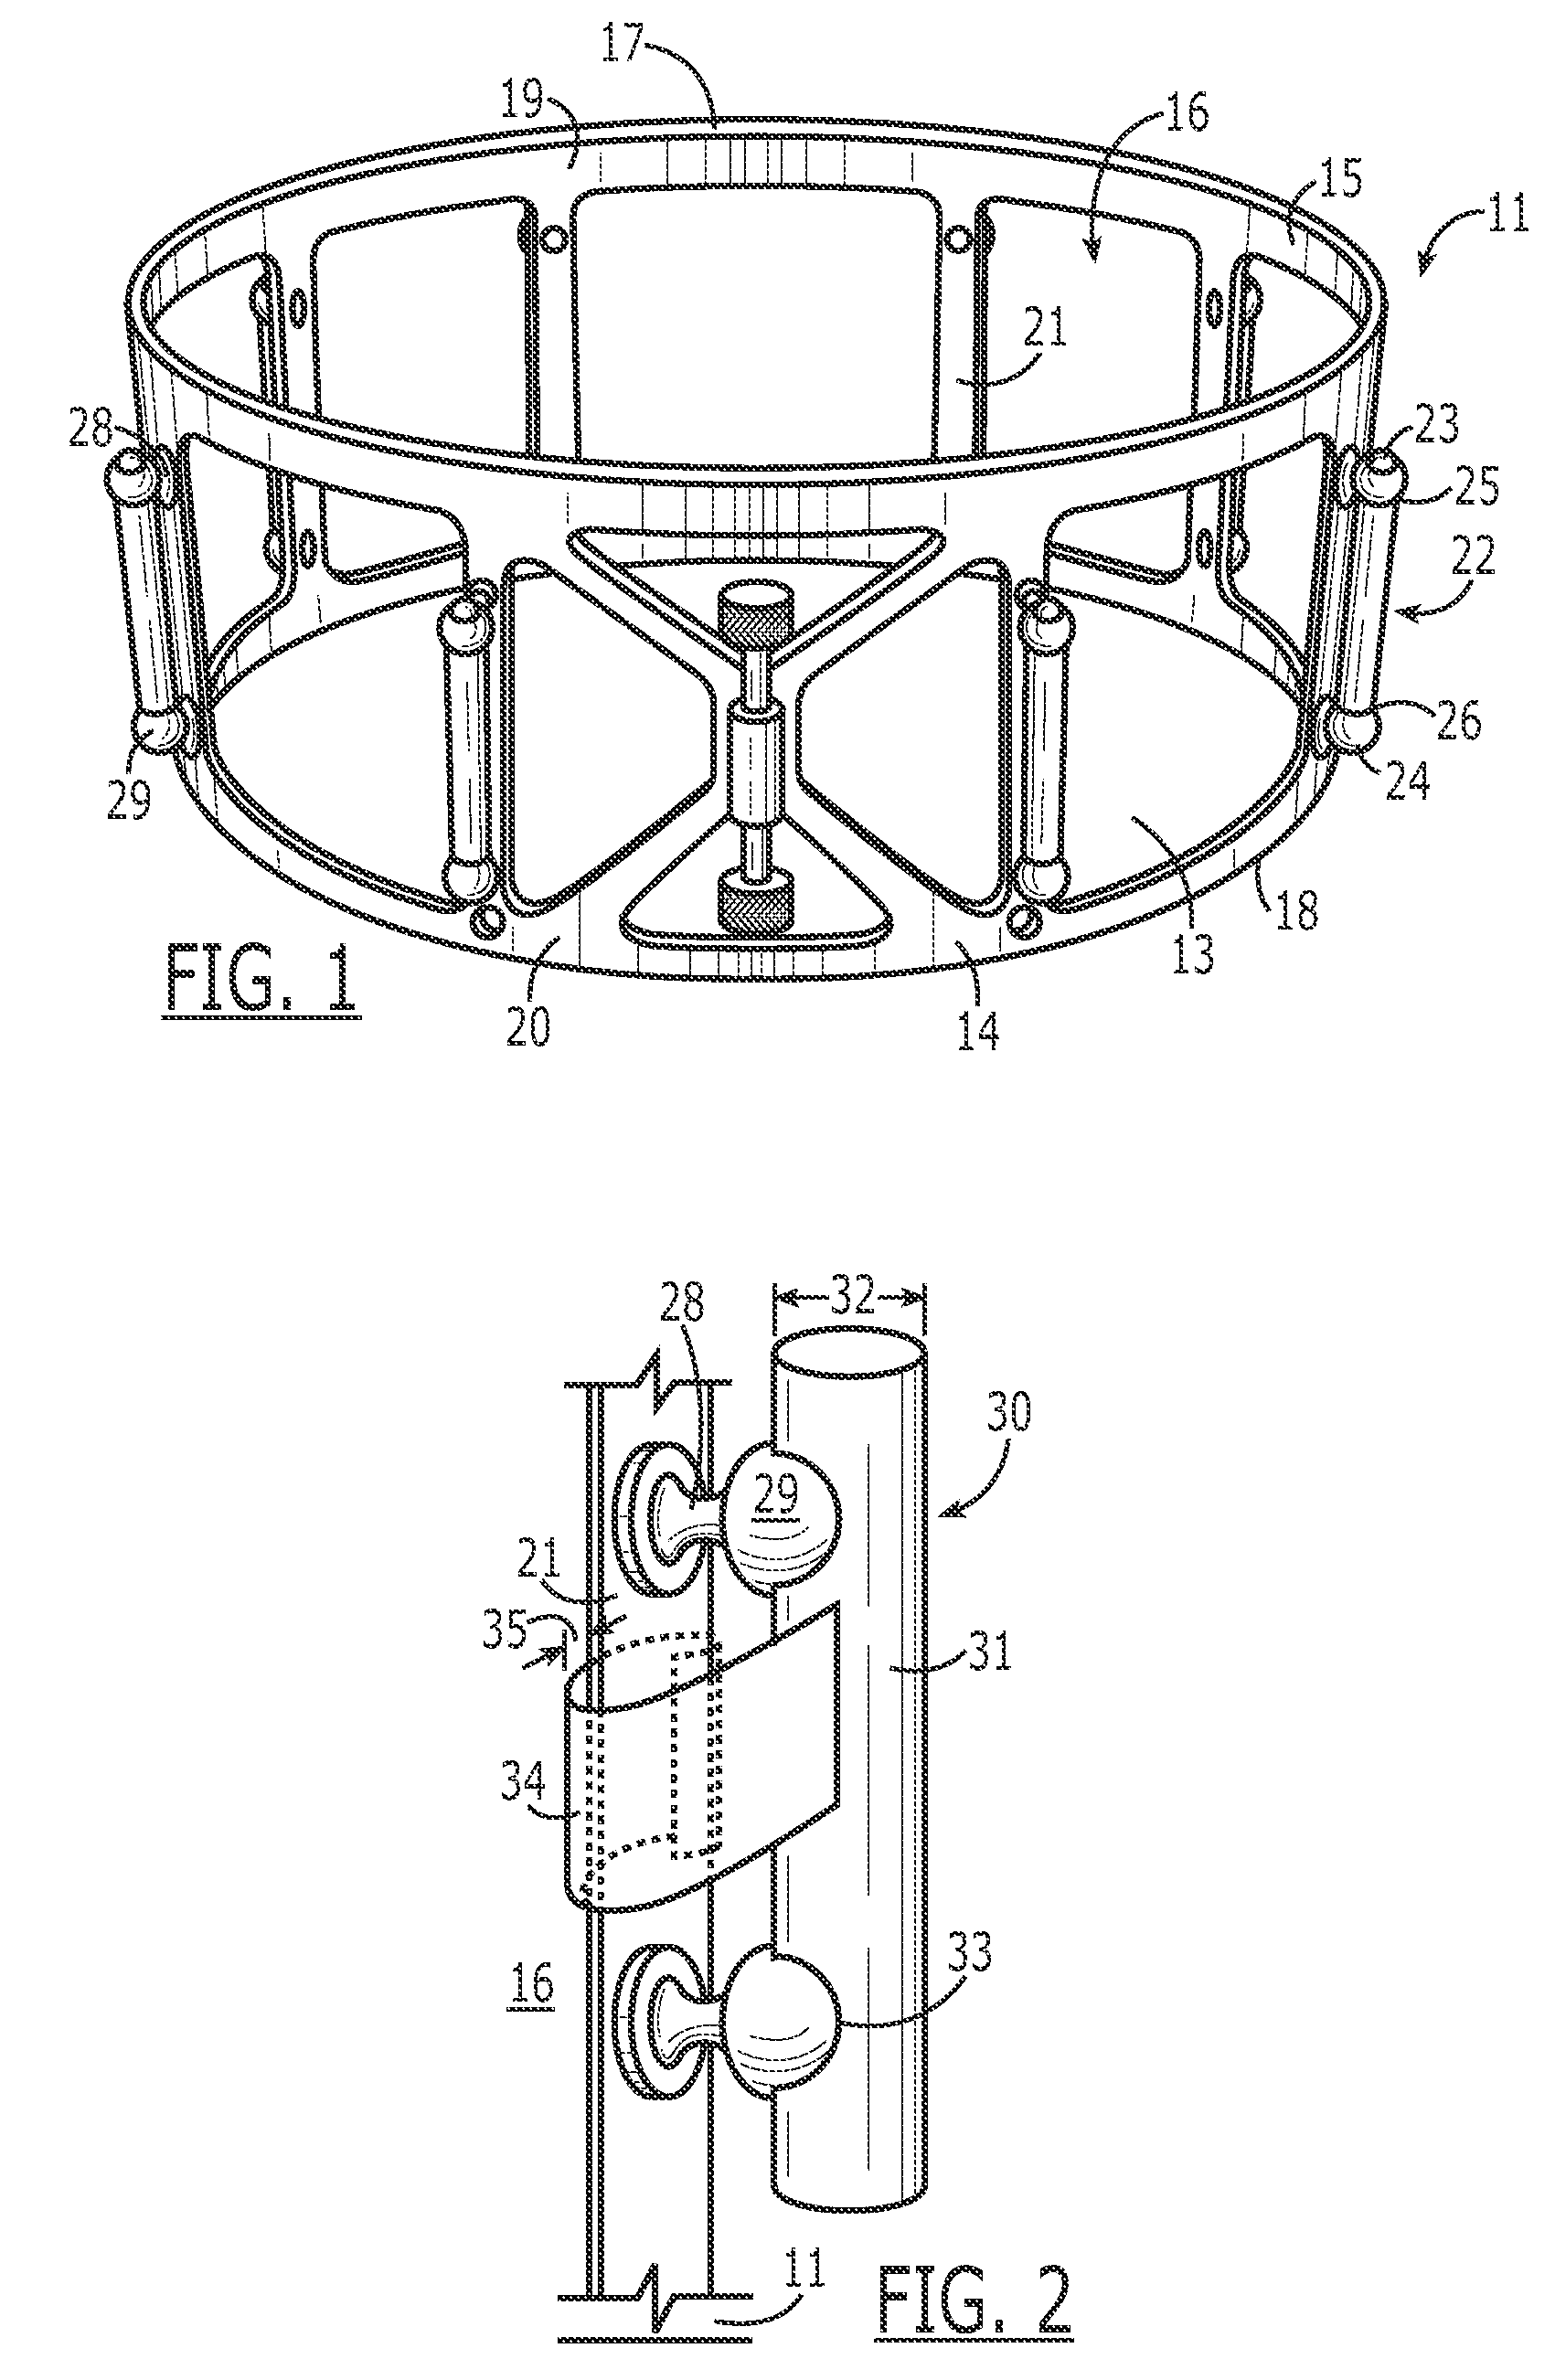 Drum shell mounting system and associated methods